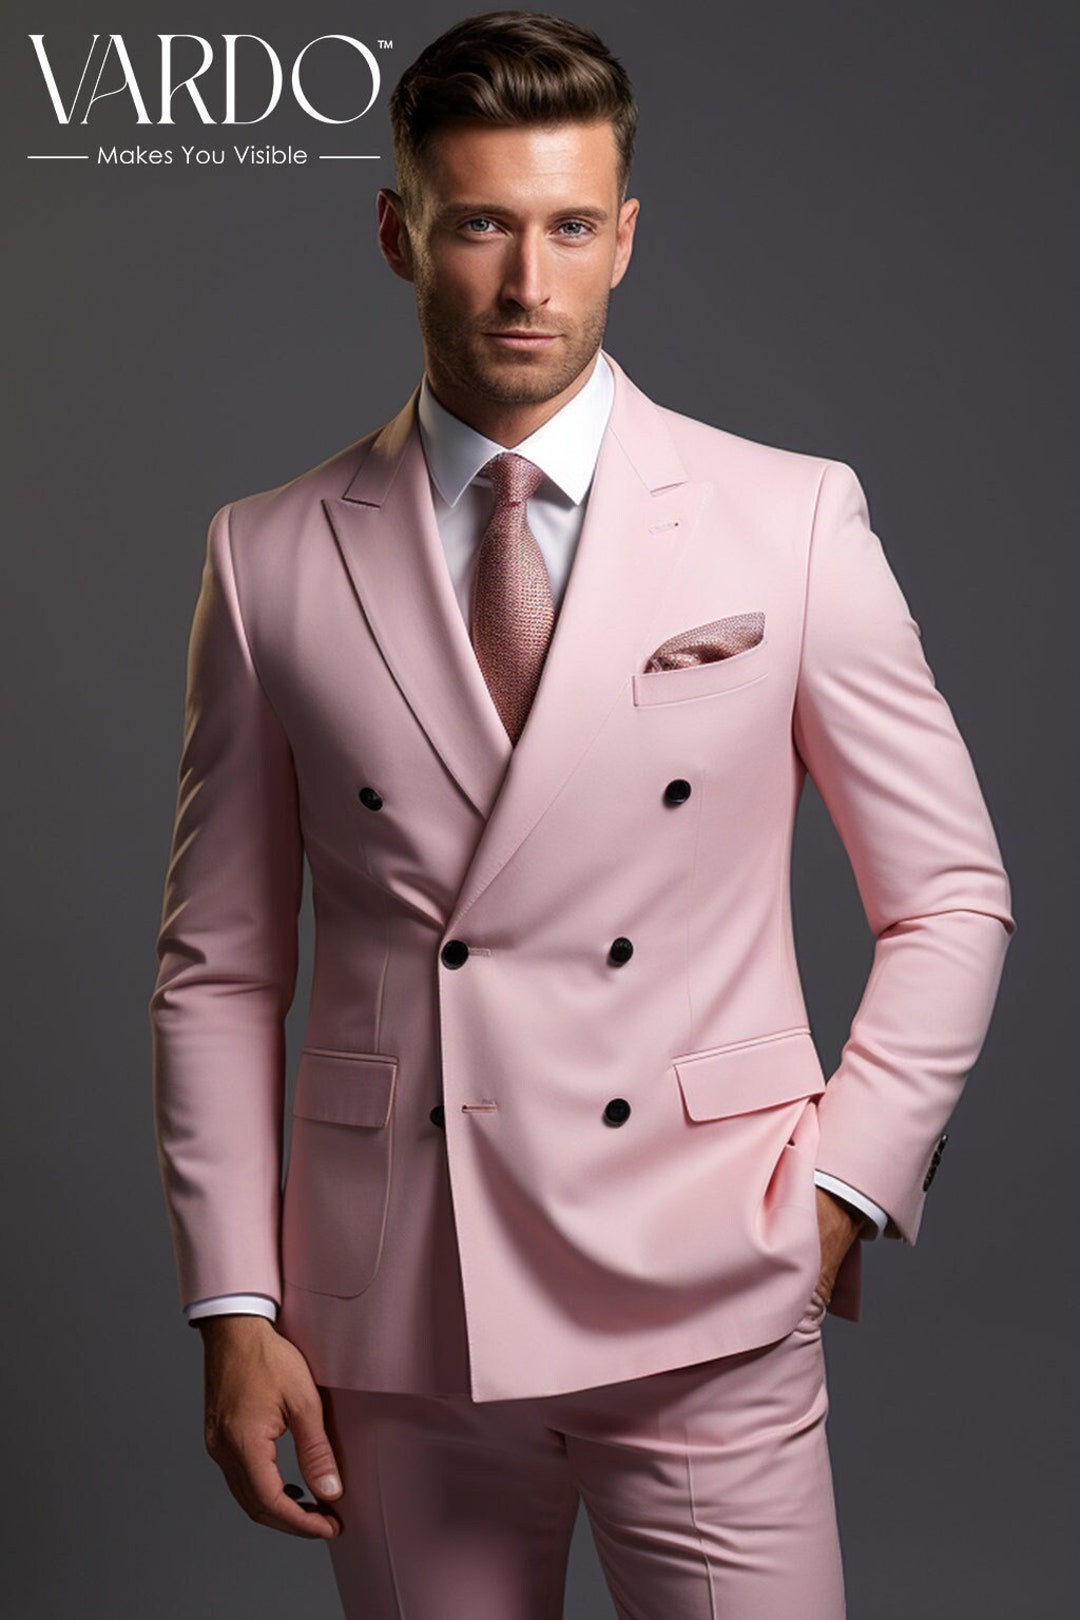 Stylish Light Pink Double Breasted Suit for Men Premium Men's Wedding ...